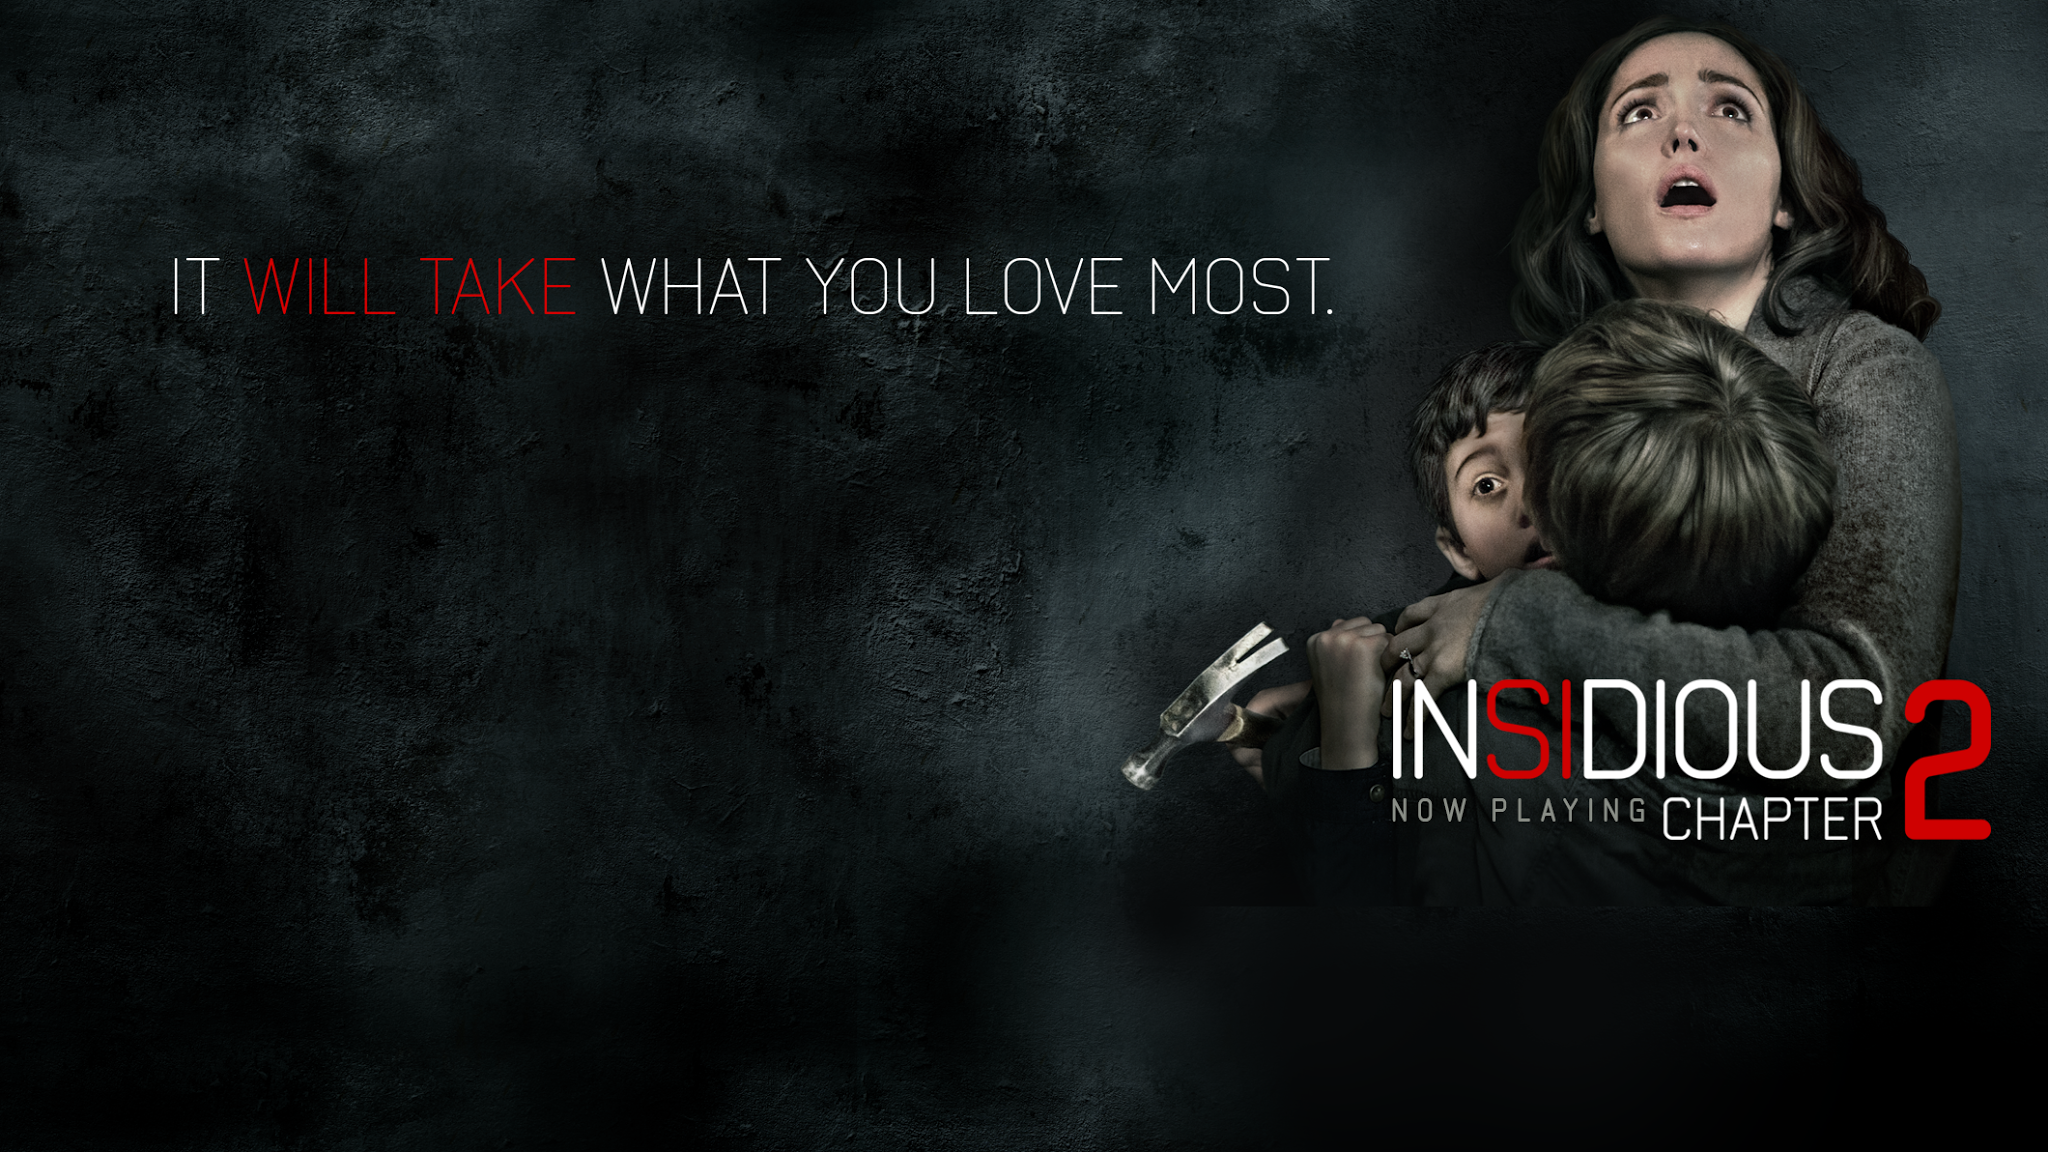 Insidious Horror Movie Poster HD Wallpaper Search More High